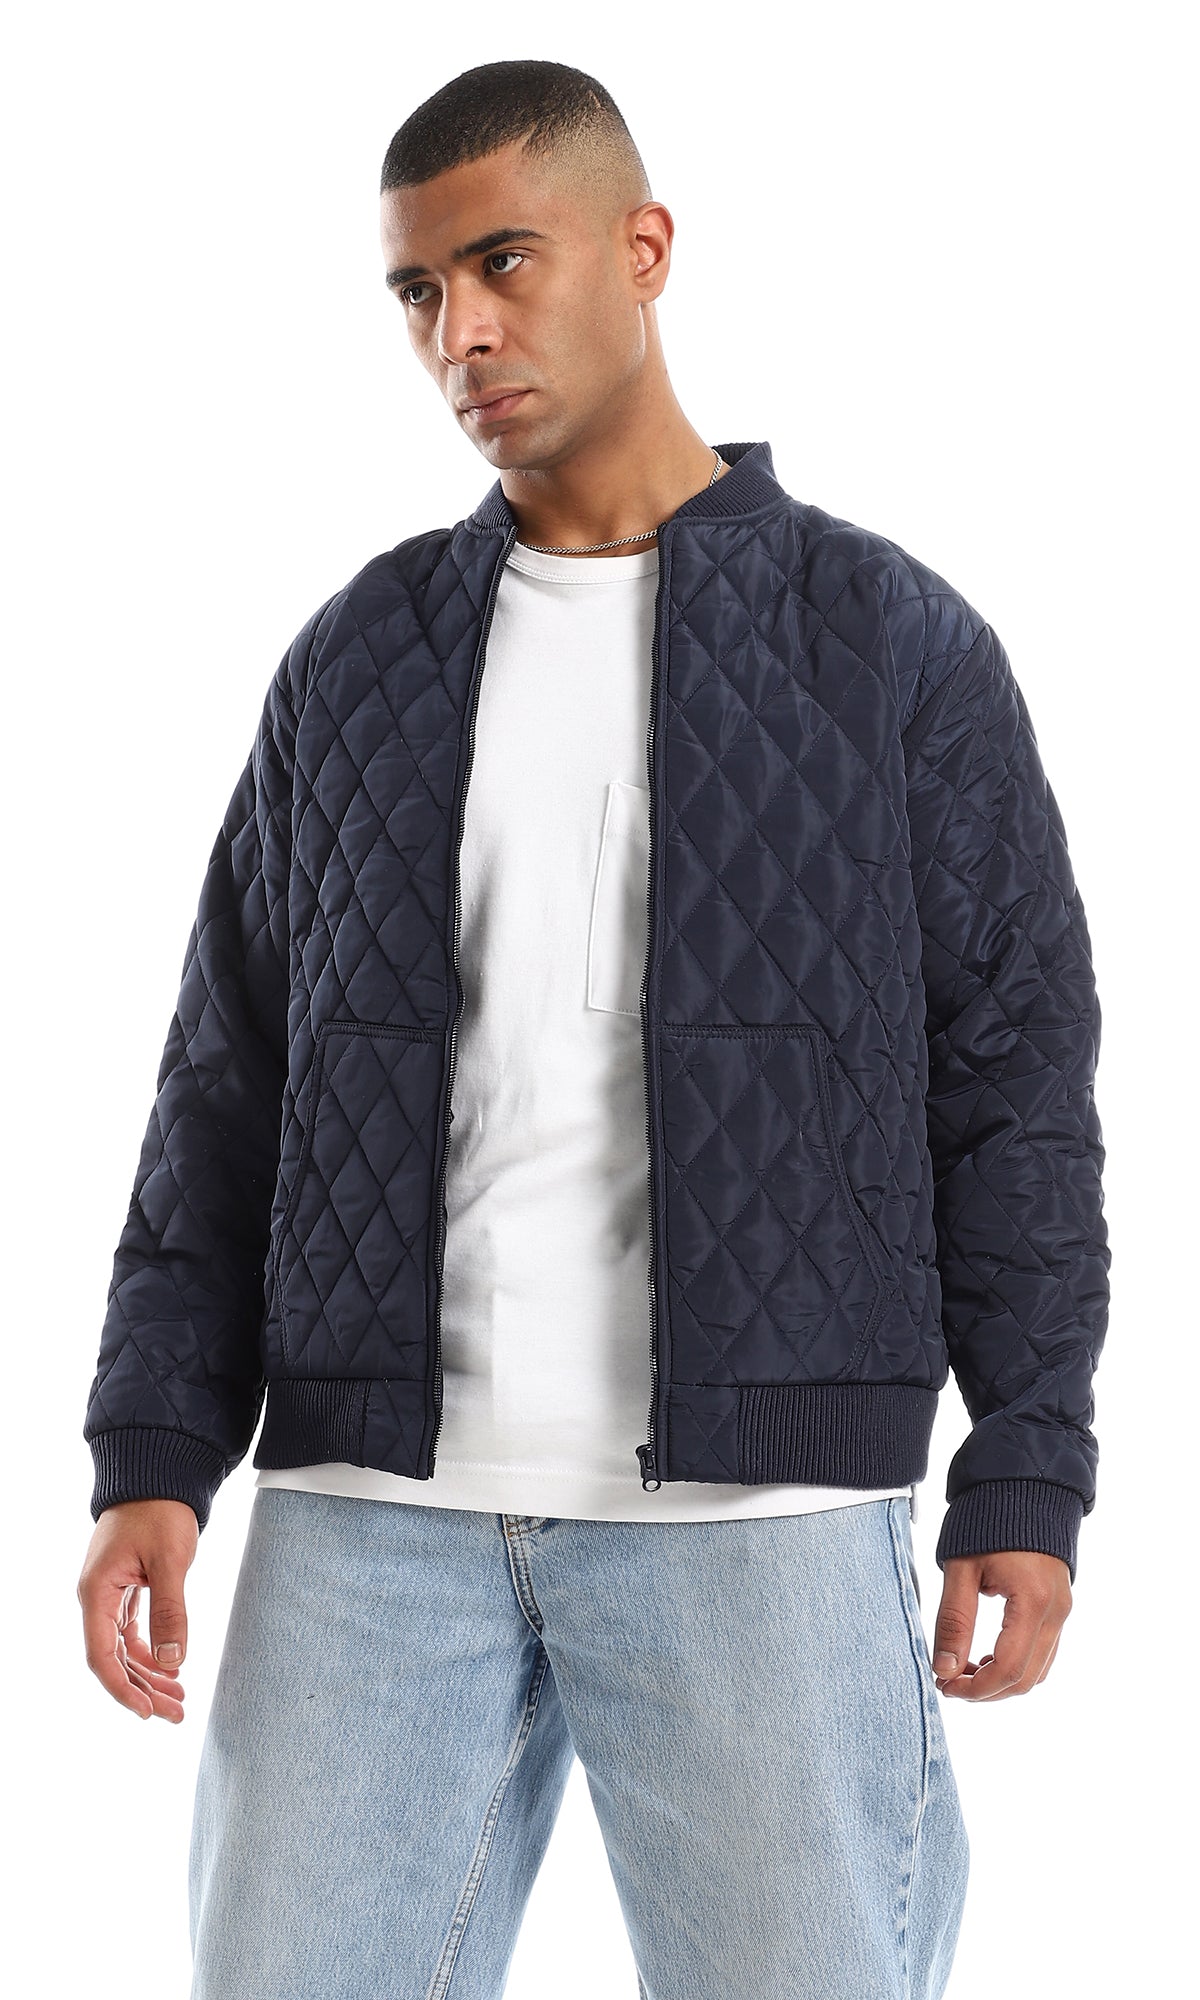 O156171 Diamond Quilted Bomber Jacket - Navy Blue